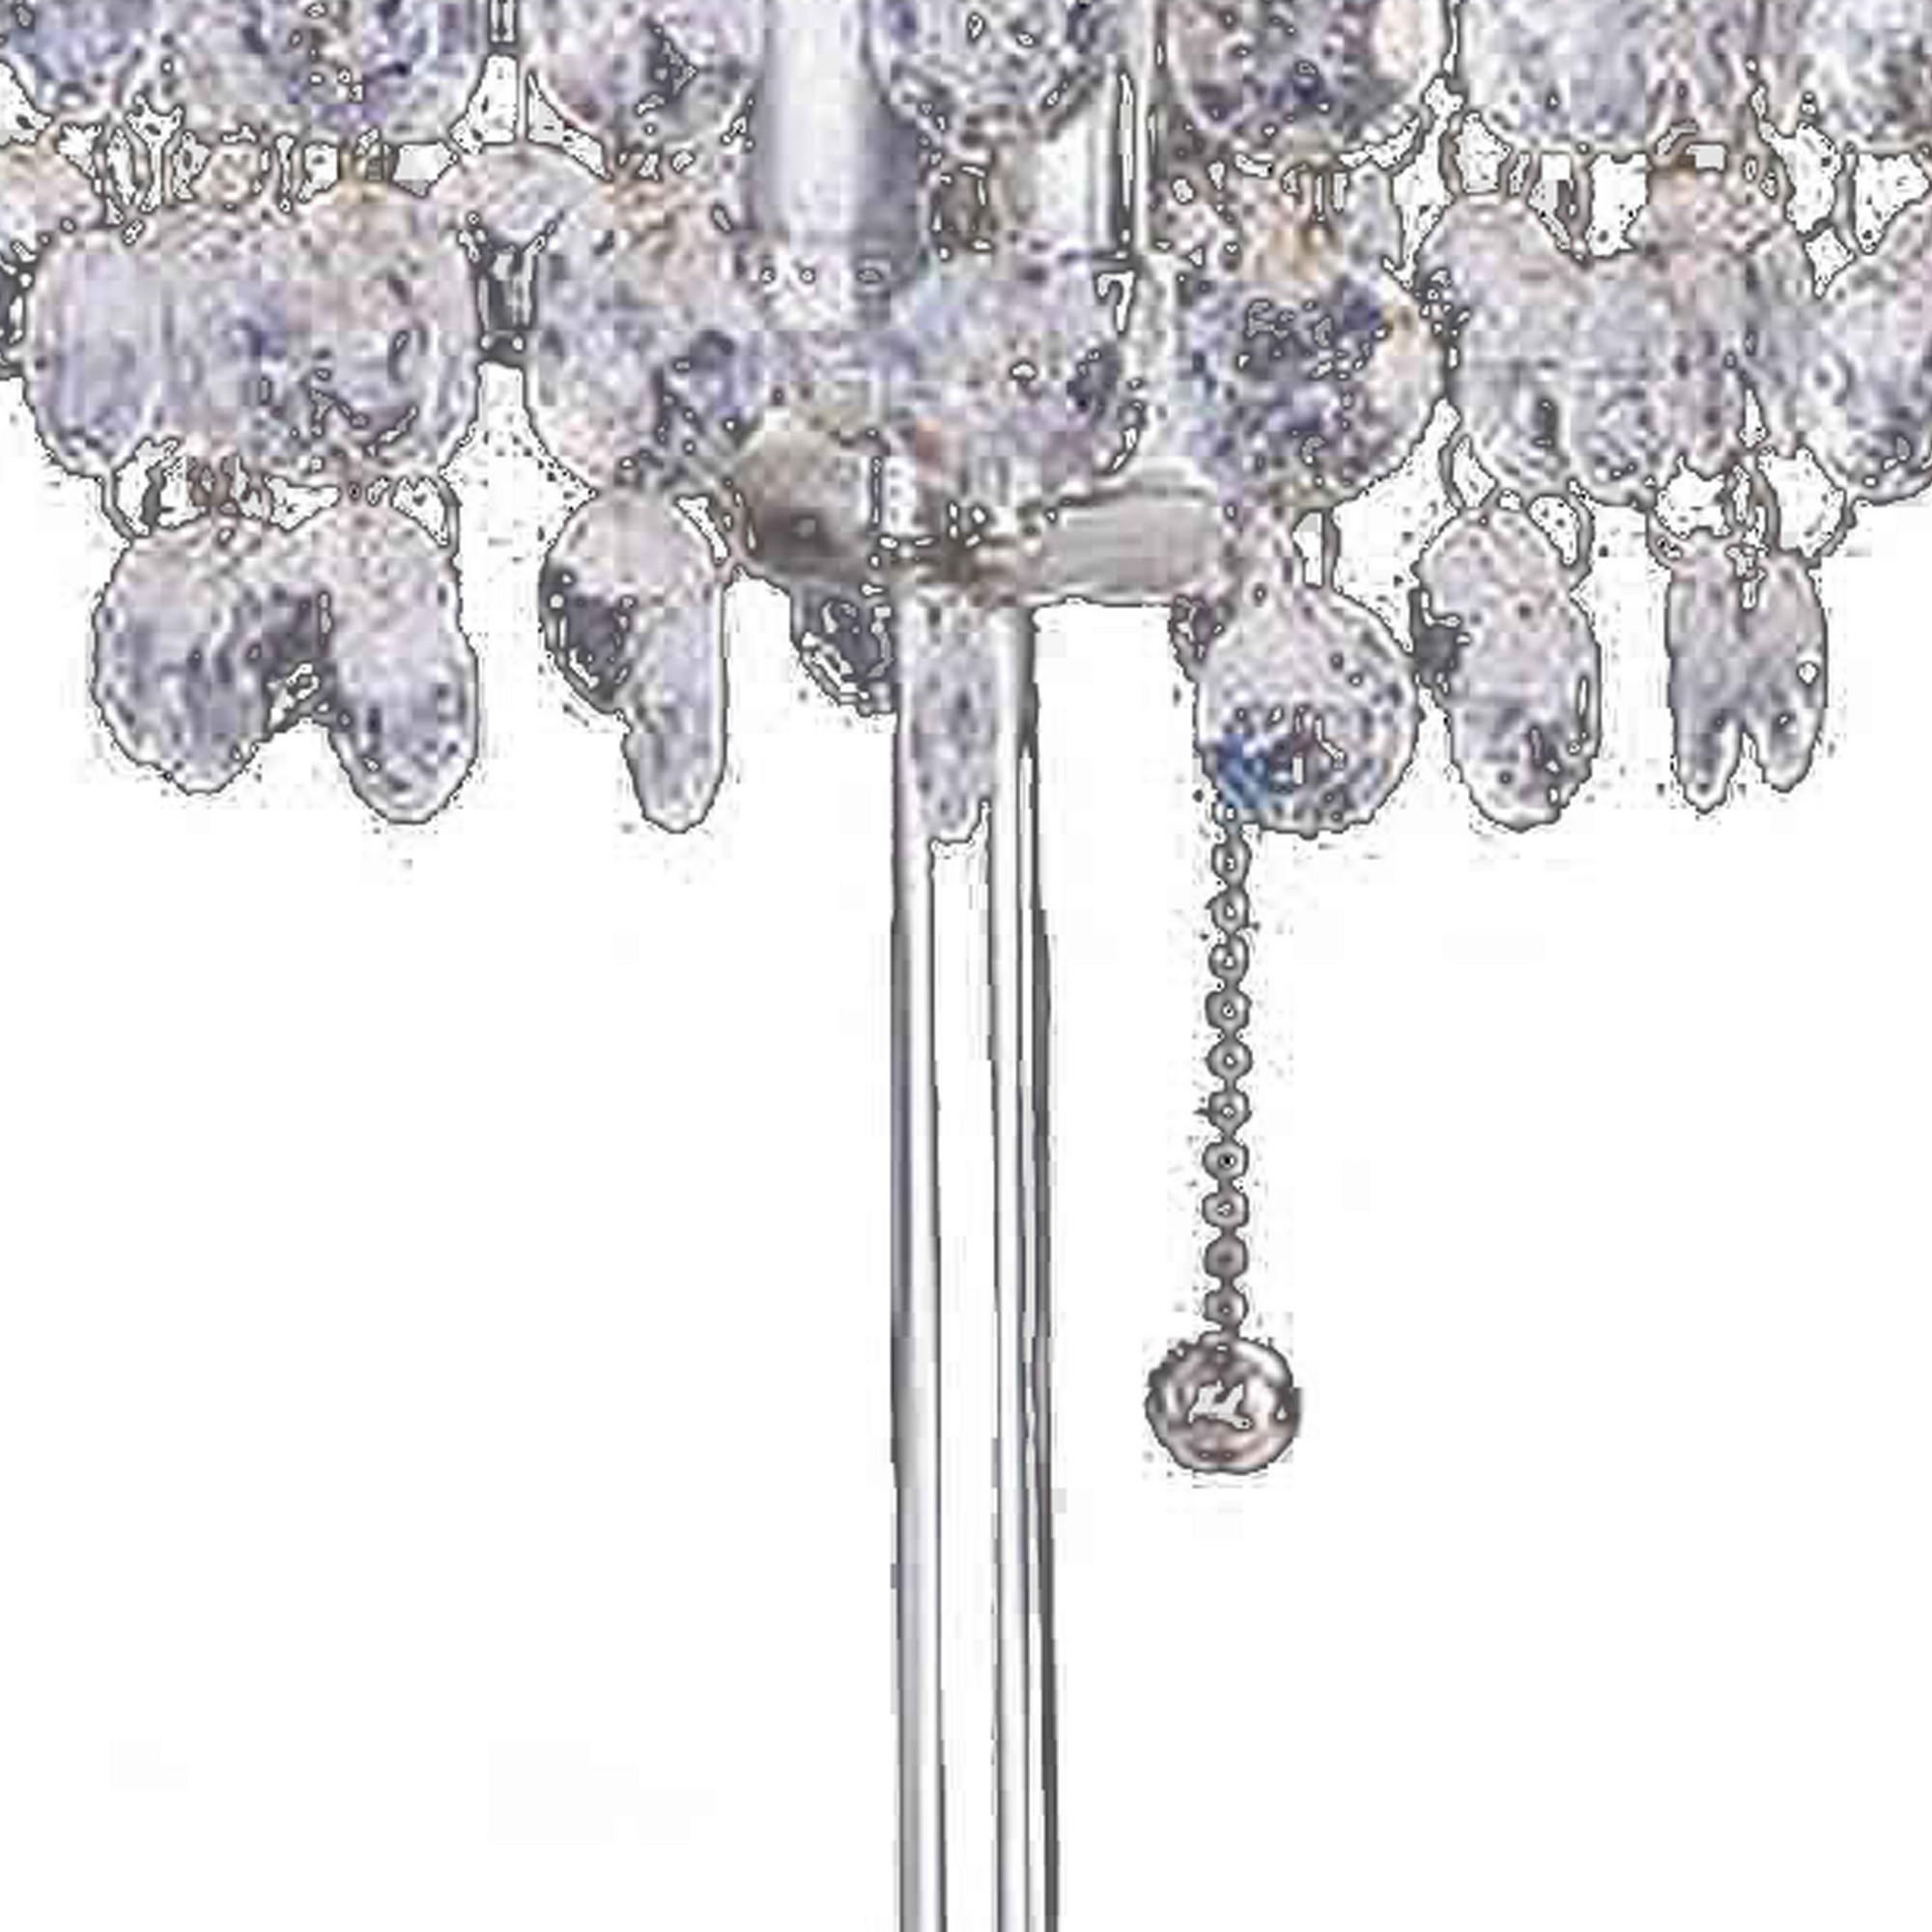 Chandelier Crystal Accented Table Lamp With Tubular Frame, Chrome And Clear- Saltoro Sherpi